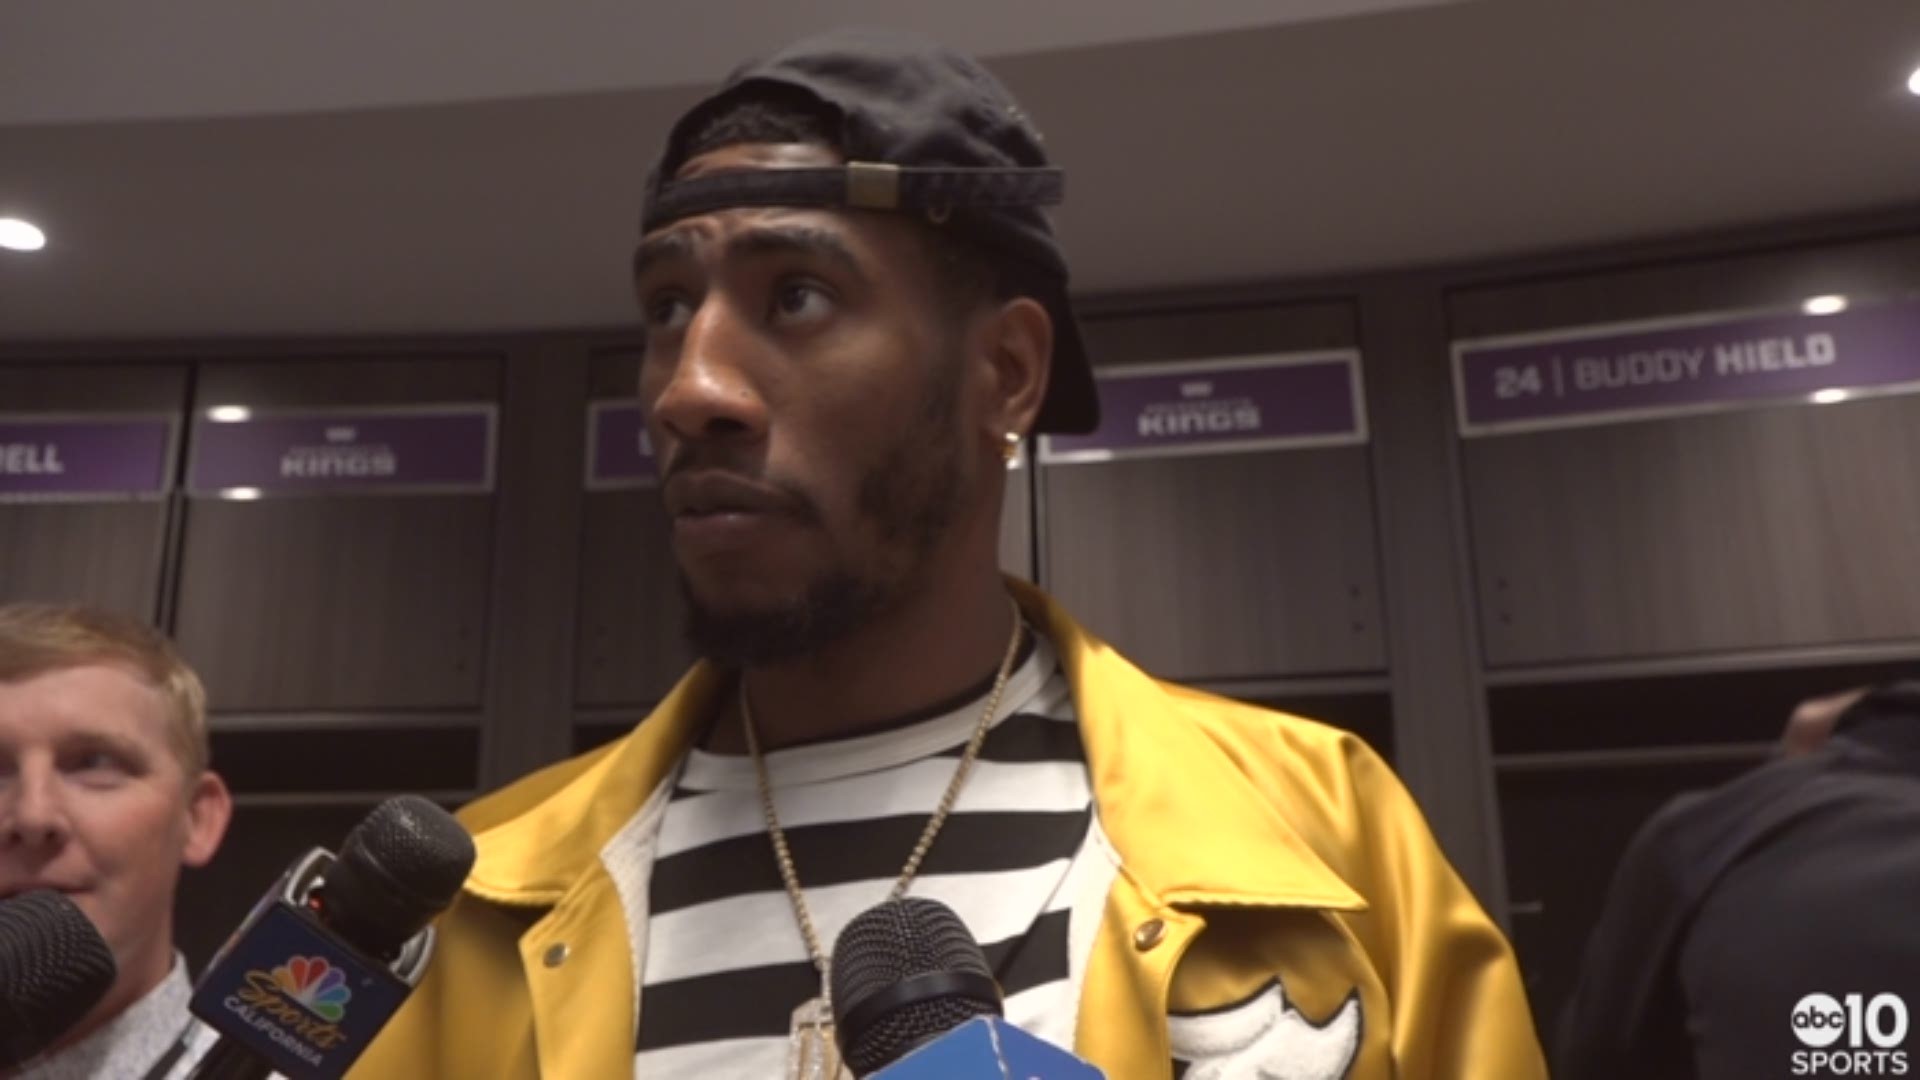 Iman Shumpert discusses his big first half performance in Monday's Kings win over the Oklahoma City Thunder, why he felt the technical on De'Aaron Fox was unnecessary, why he'll pay for it and addresses recent reports about the future of his coach Dave Joerger.